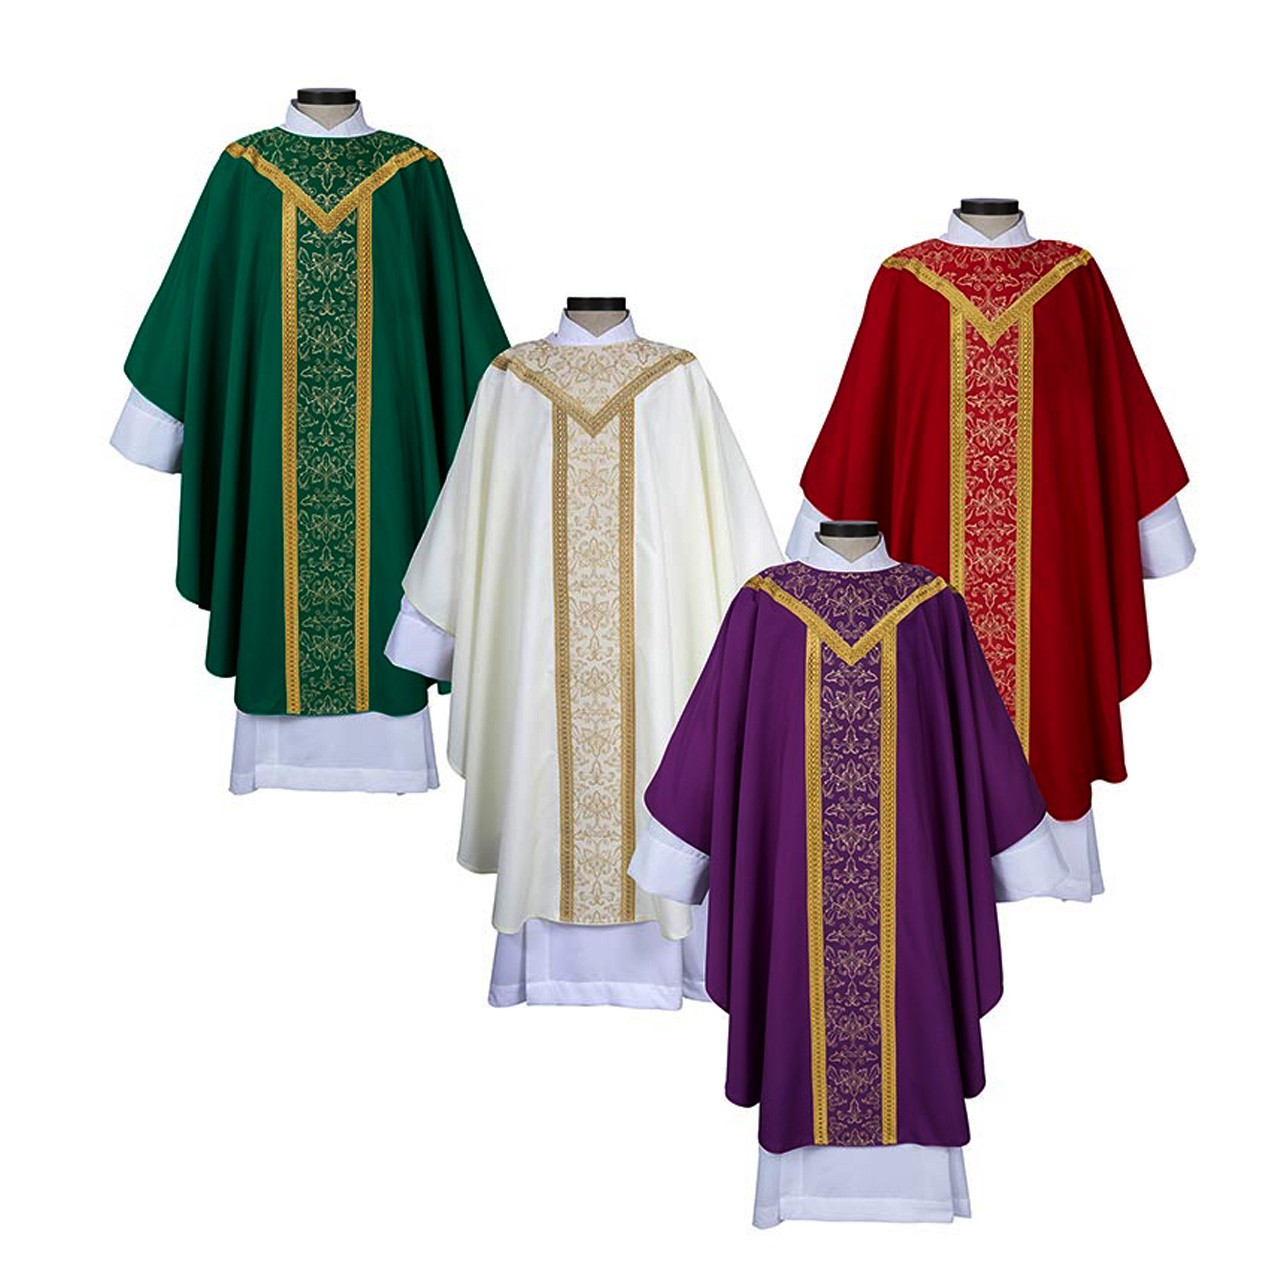 J0108 St. Remy Gothic Chasuble/Set of 4